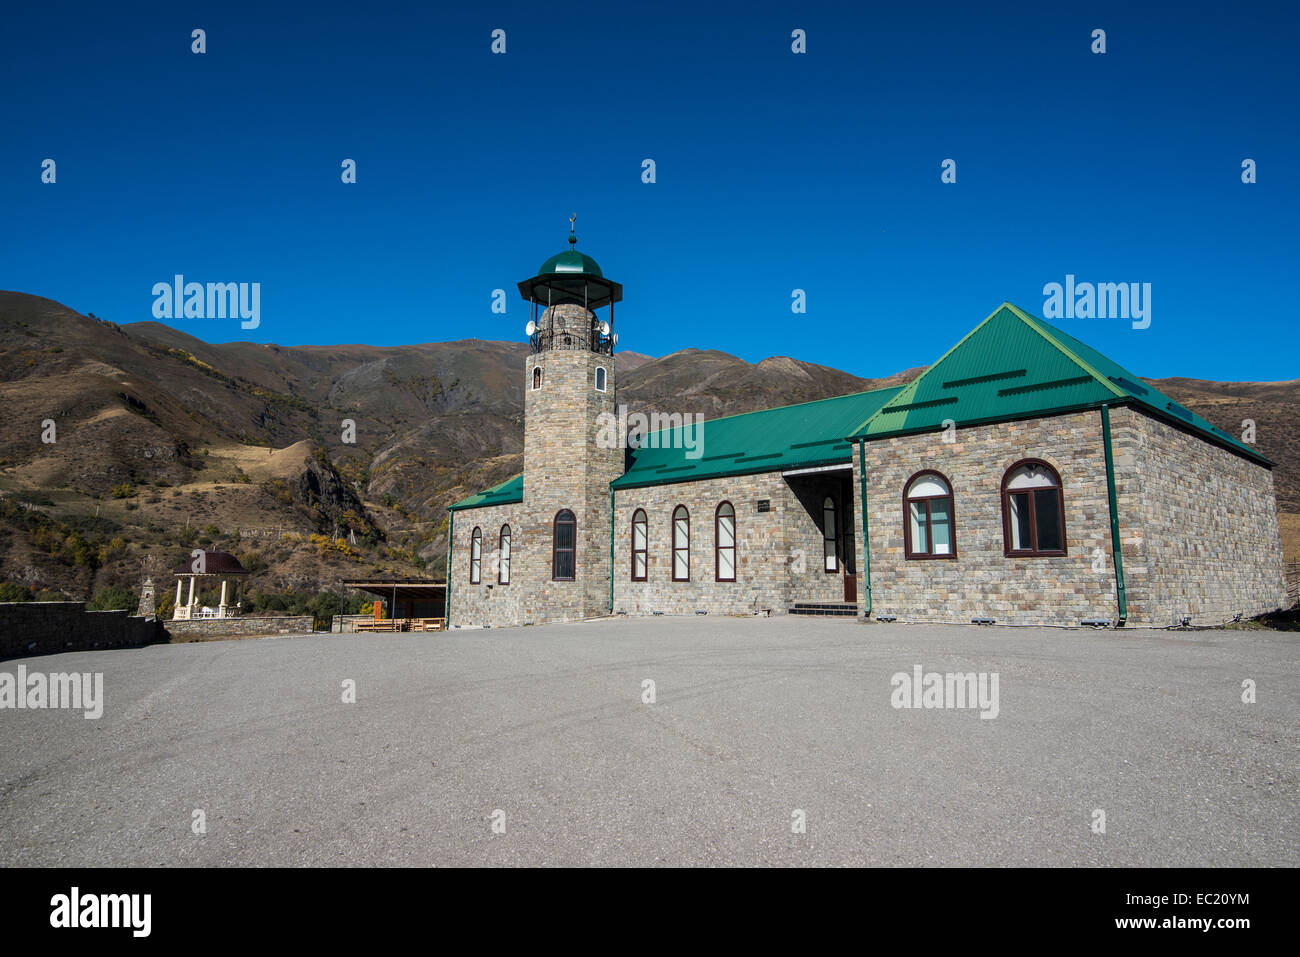 Mosque in the grounds of the Husein Isaev Museum of local history, Itum Kale, Chechnya, Caucasus, Russia Stock Photo